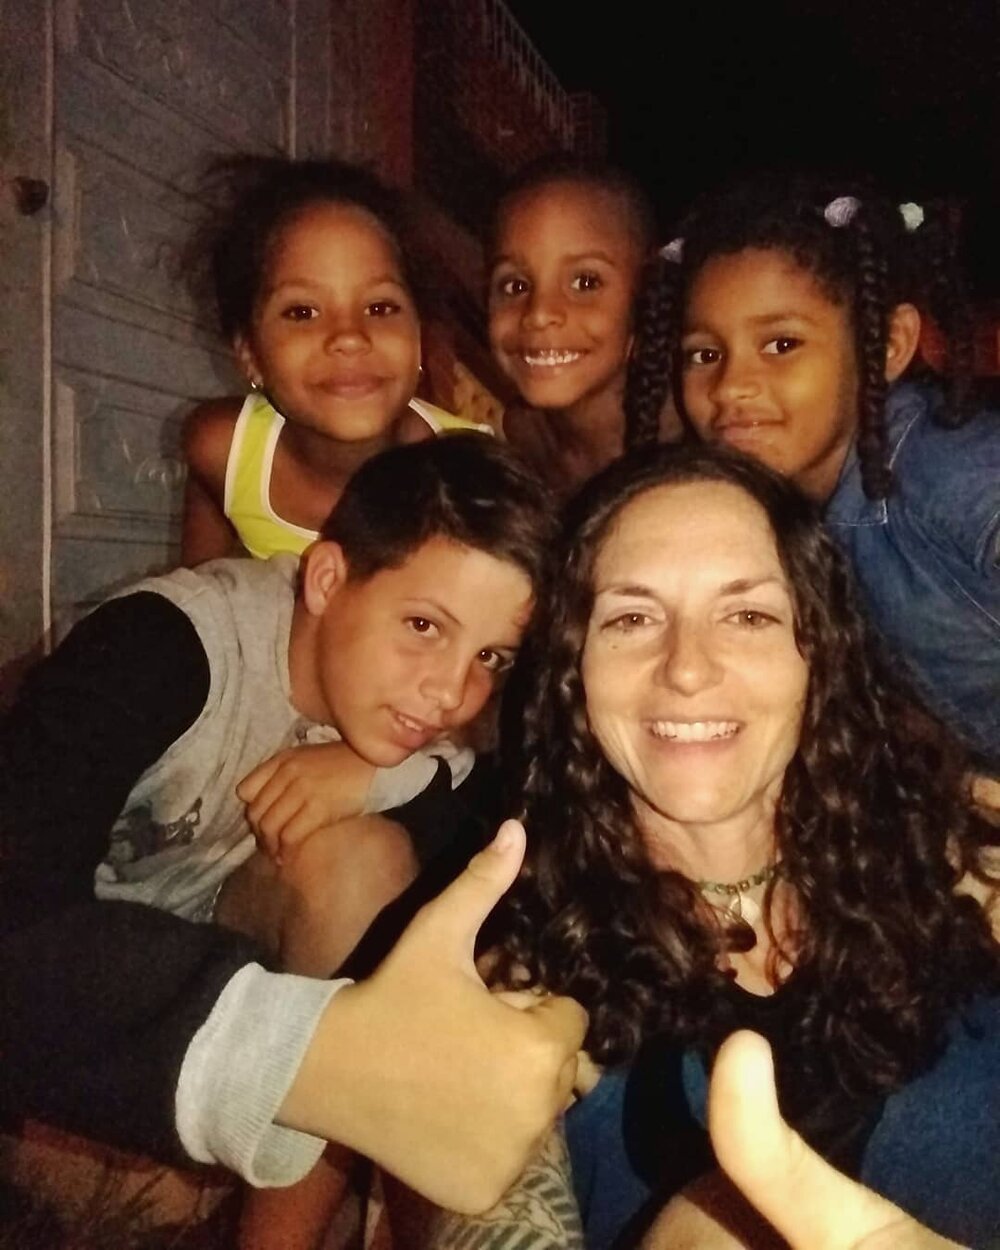 There are a lot of beautiful things about Cuban culture that I experienced in 2019. One of them is that kids play in the streets at night. Es seguro? Si, es seguro. These kids said yes, it's safe to play outside at night. Thumbs up, we want to be fri